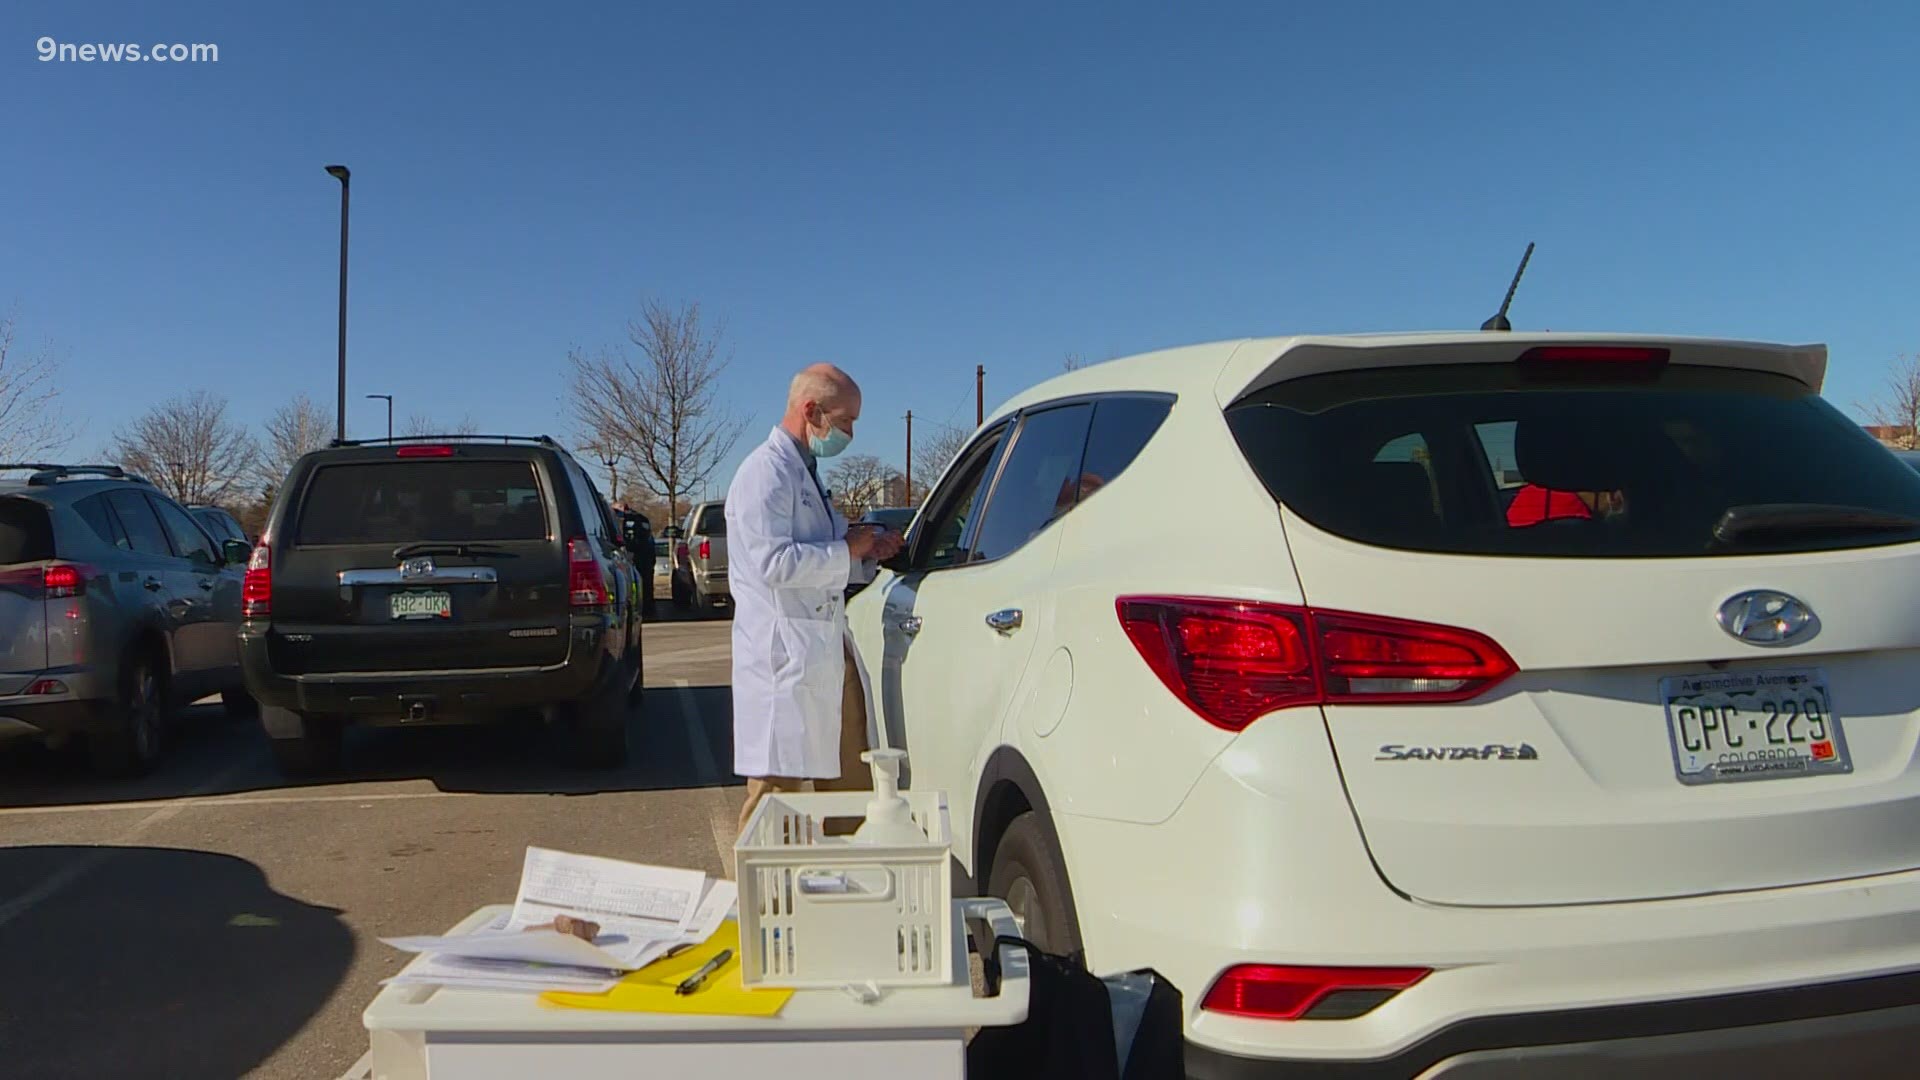 After learning from a chaotic start on Monday, National Jewish Health vaccinated around 500 people in their cars on Wednesday morning.